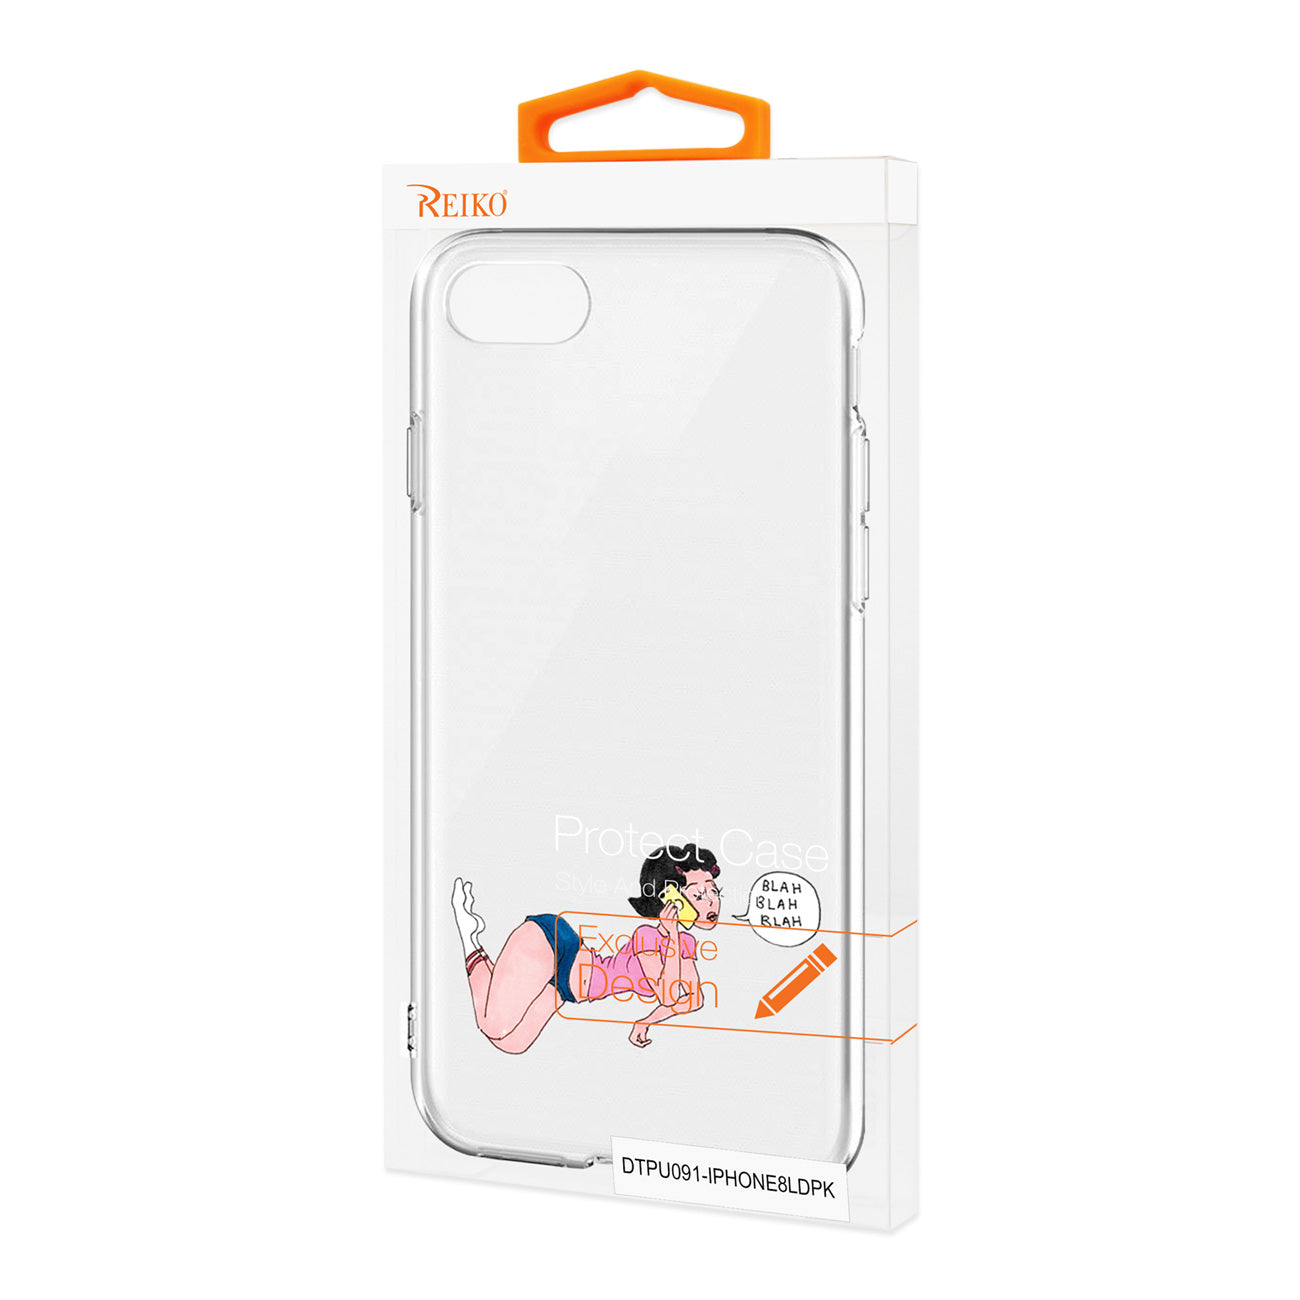 Case Air Cushion With Lady Design iPhone 7/ 8/ SE2